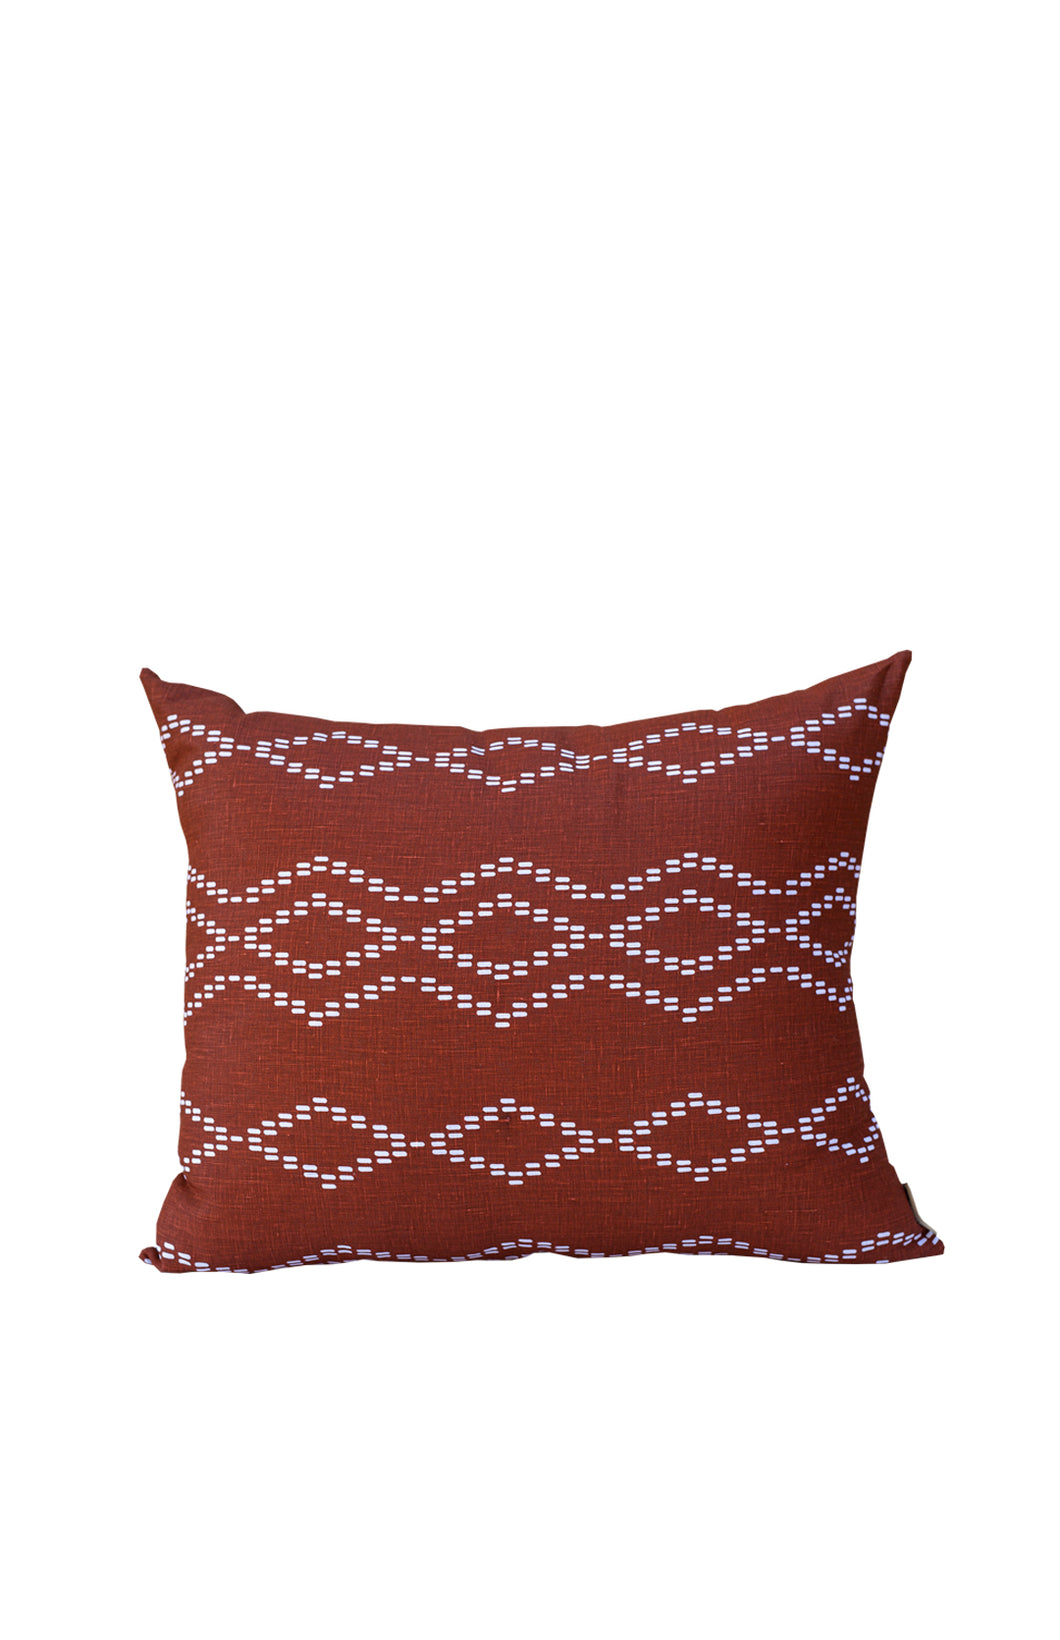 Niizh 16x20 Pillow in red earth